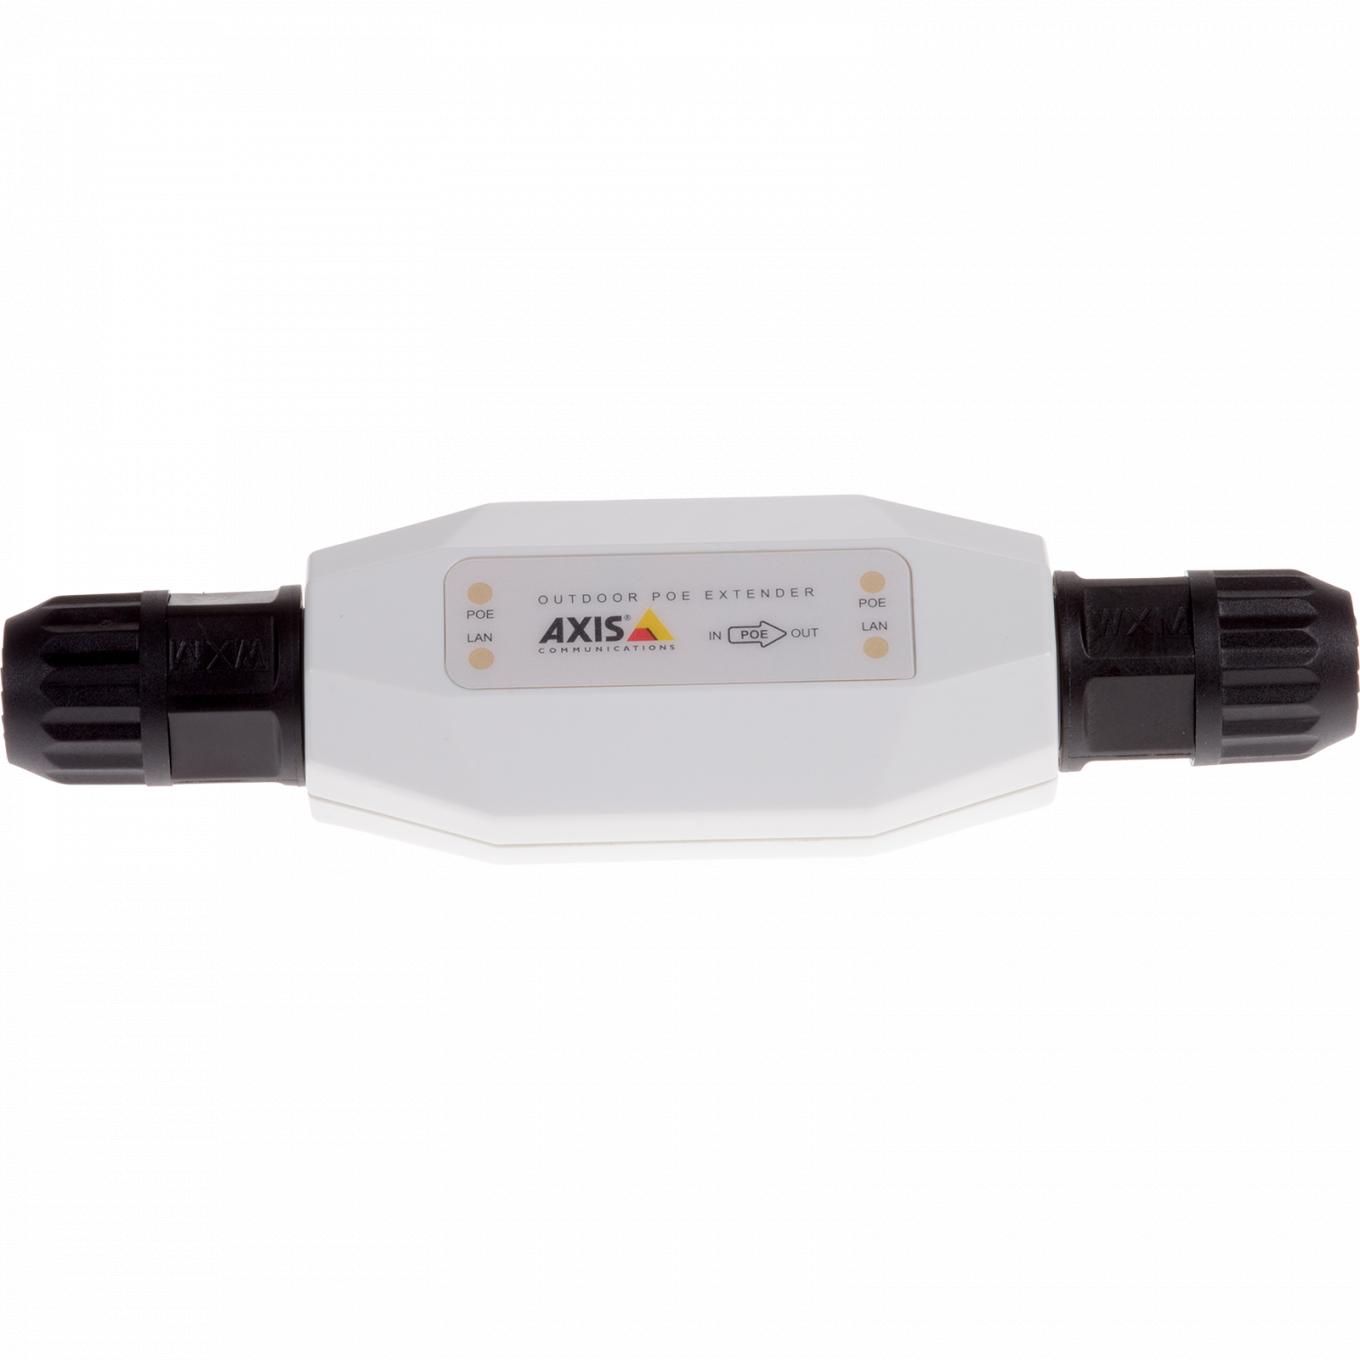 AXIS T8129-e outdoor Poe extender frontal